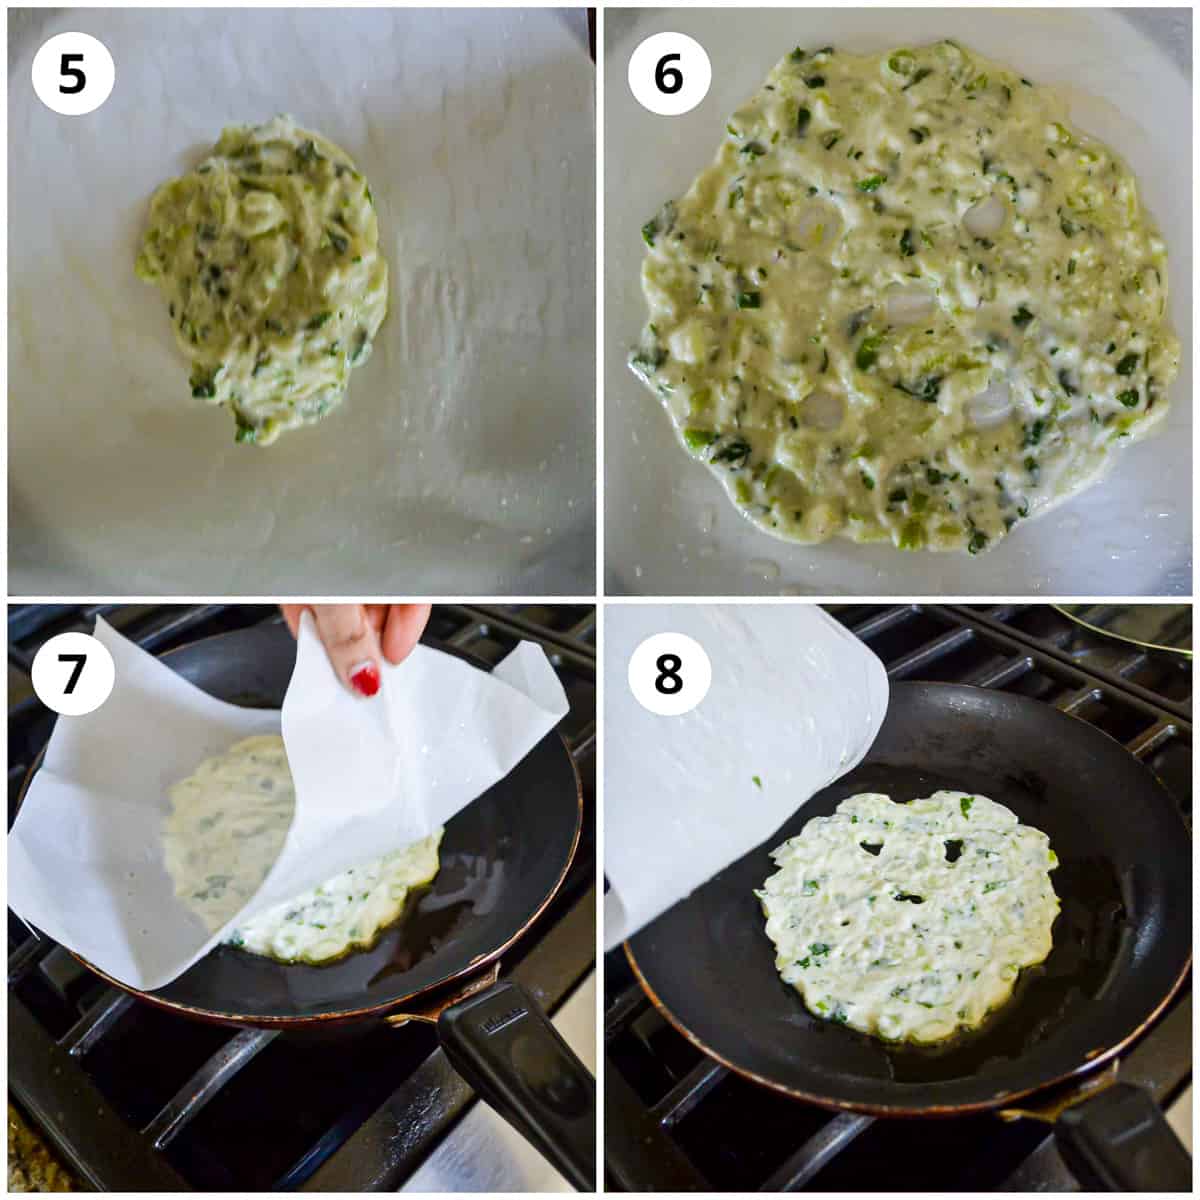 Showing how to cook the cucumber thalipeeth using the traditional method.